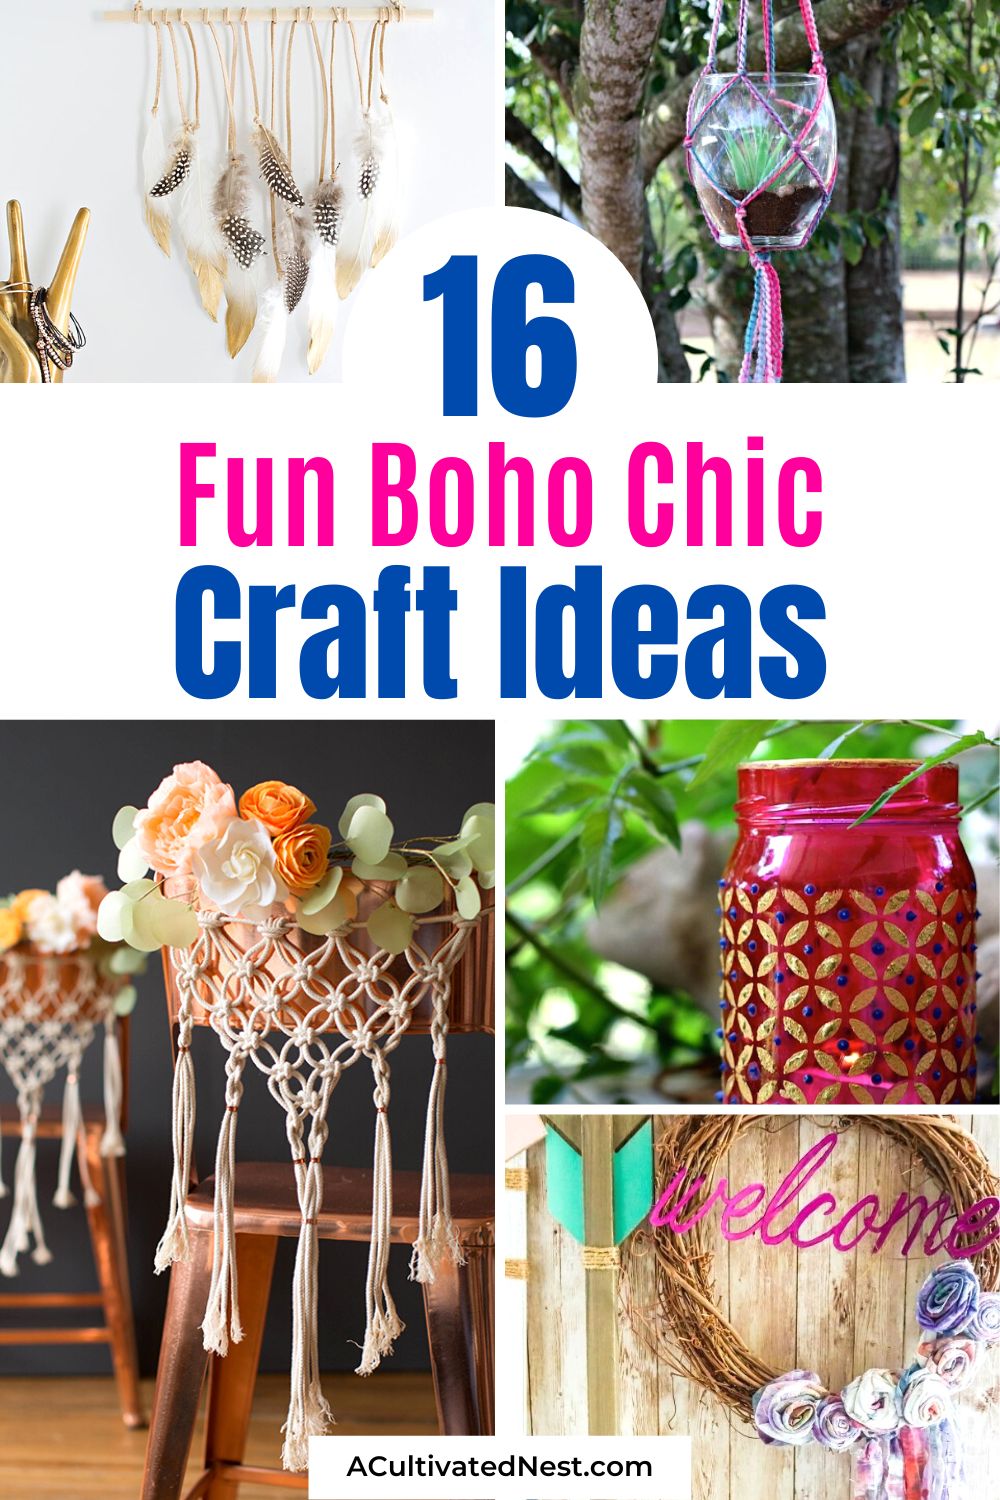 16 Fun Boho Chic Crafts- Unlock your artistic side with these fun boho chic crafts! Whether you're a crafting guru or just starting out, these projects are perfect for adding a whimsical, bohemian touch to your world! | #BohoCrafting #DIYInspiration #CraftyIdeas #bohoDecor #ACultivatedNest